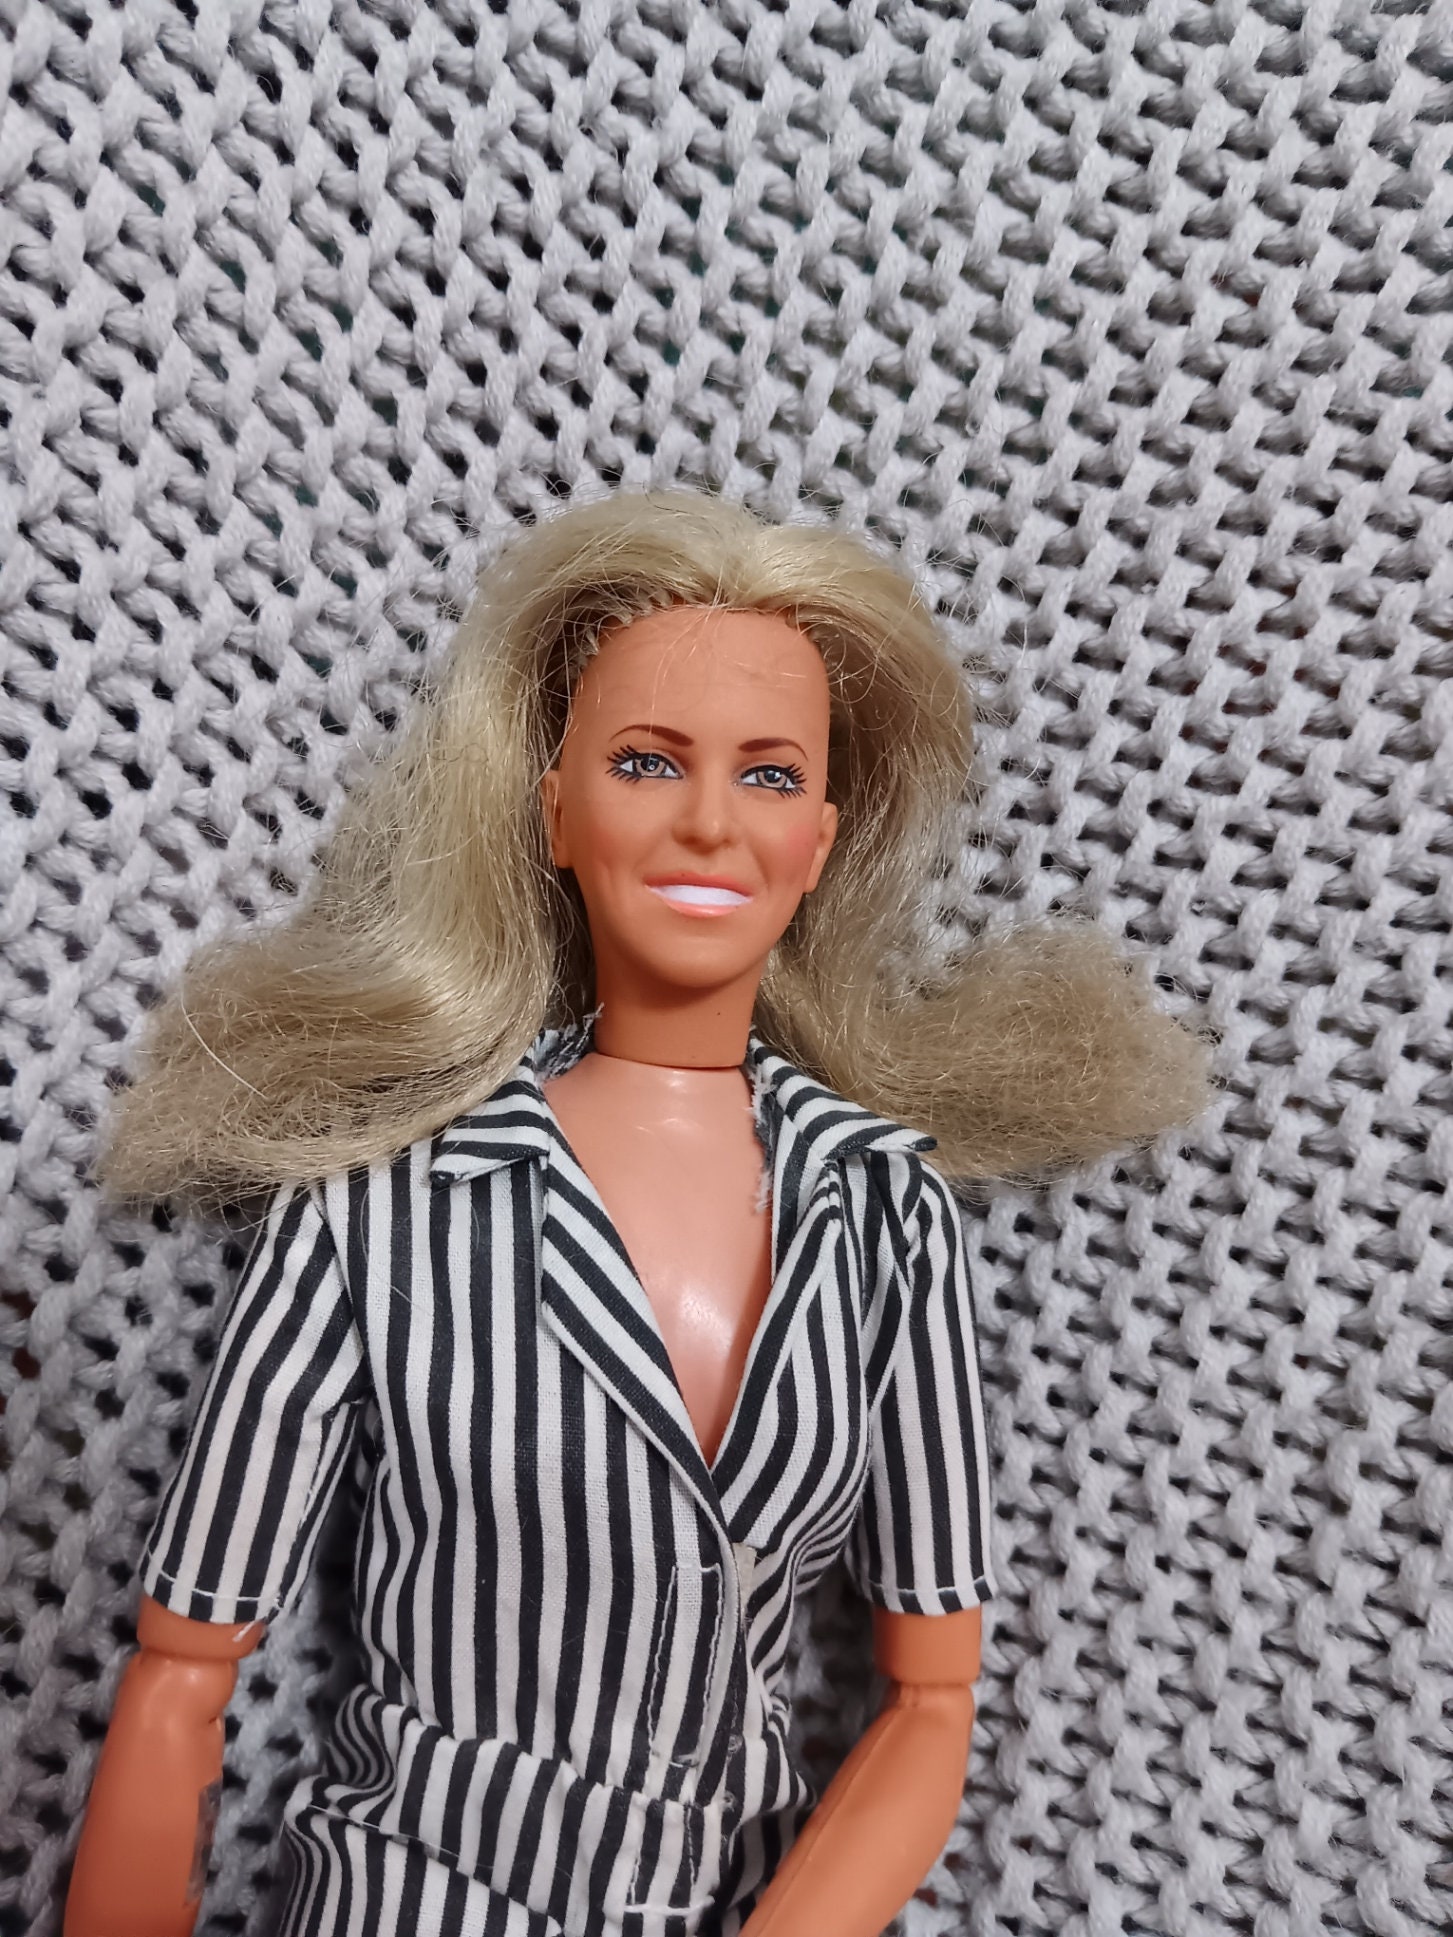 Vintage Bionic Woman, Jaime Sommers, in Casual Summer Outfit, C. 1974 Kenner  